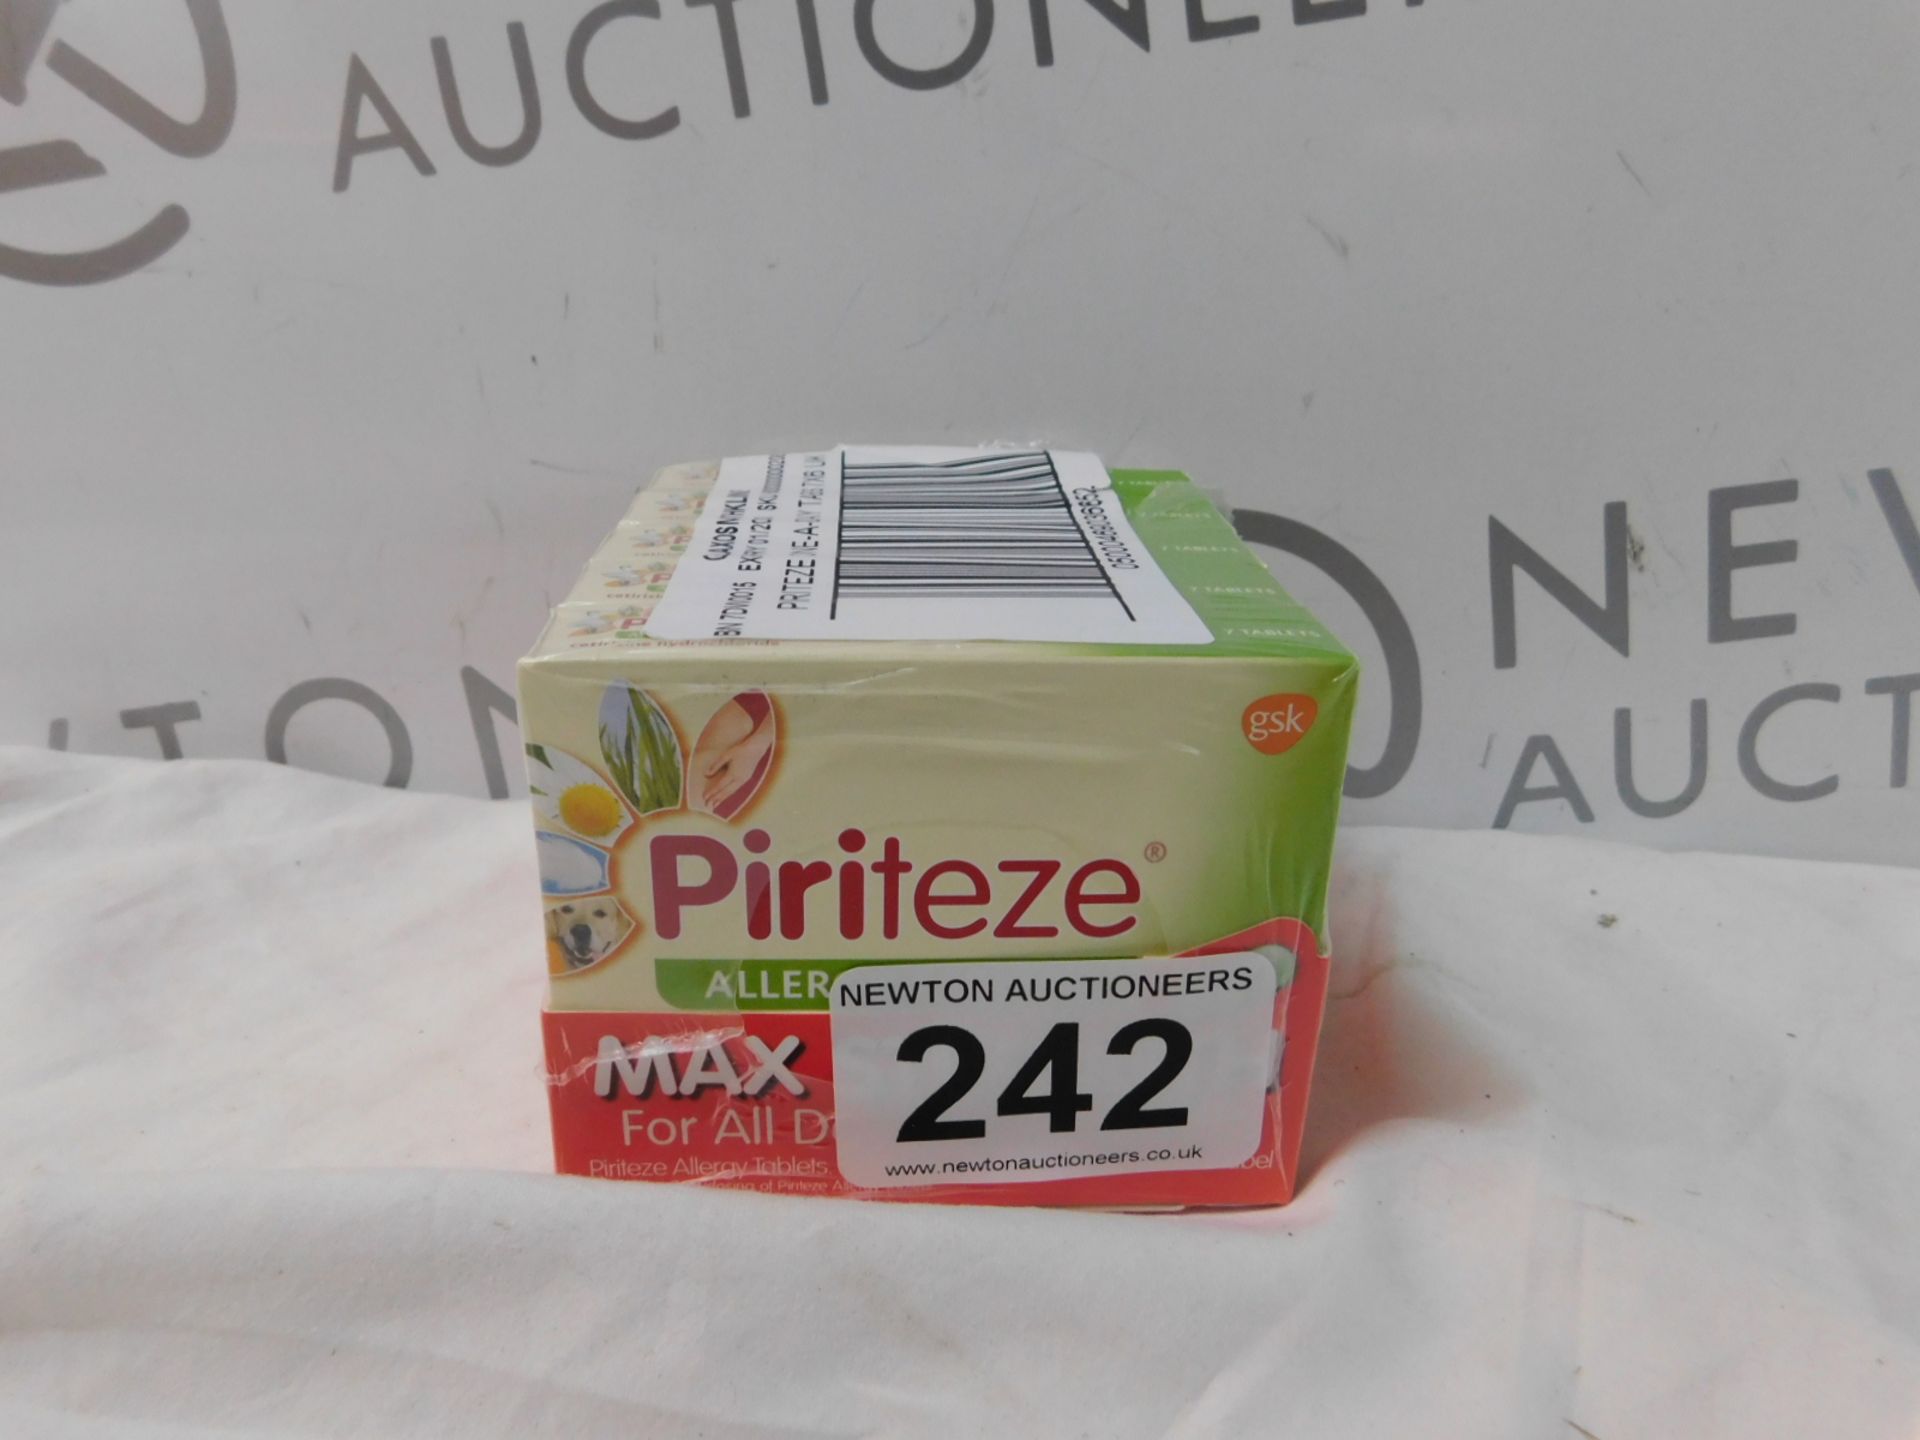 5 BOXES OF PIRITEZE MAX STRENGTH ALLERGY TABLETS (7 TABLETS PER BOX) RRP £29.99 (EXPIRY 01/2020)